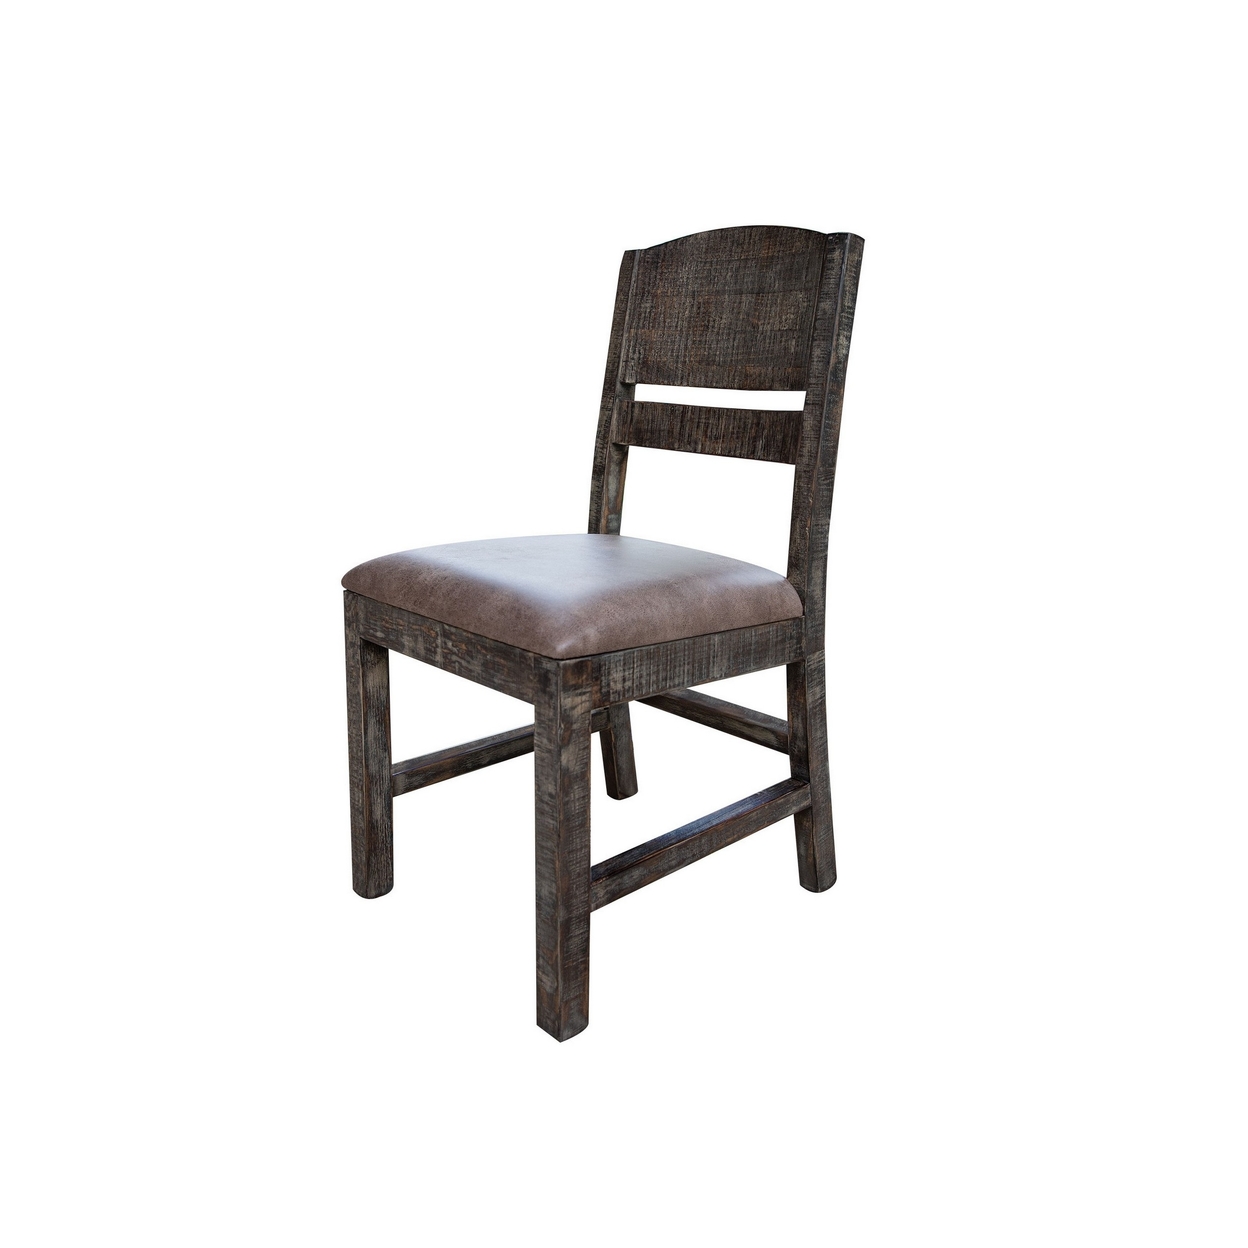 Noa 34 Inch Dining Chair, Solid Pine Wood, Panel Back, Distressed Brown- Saltoro Sherpi